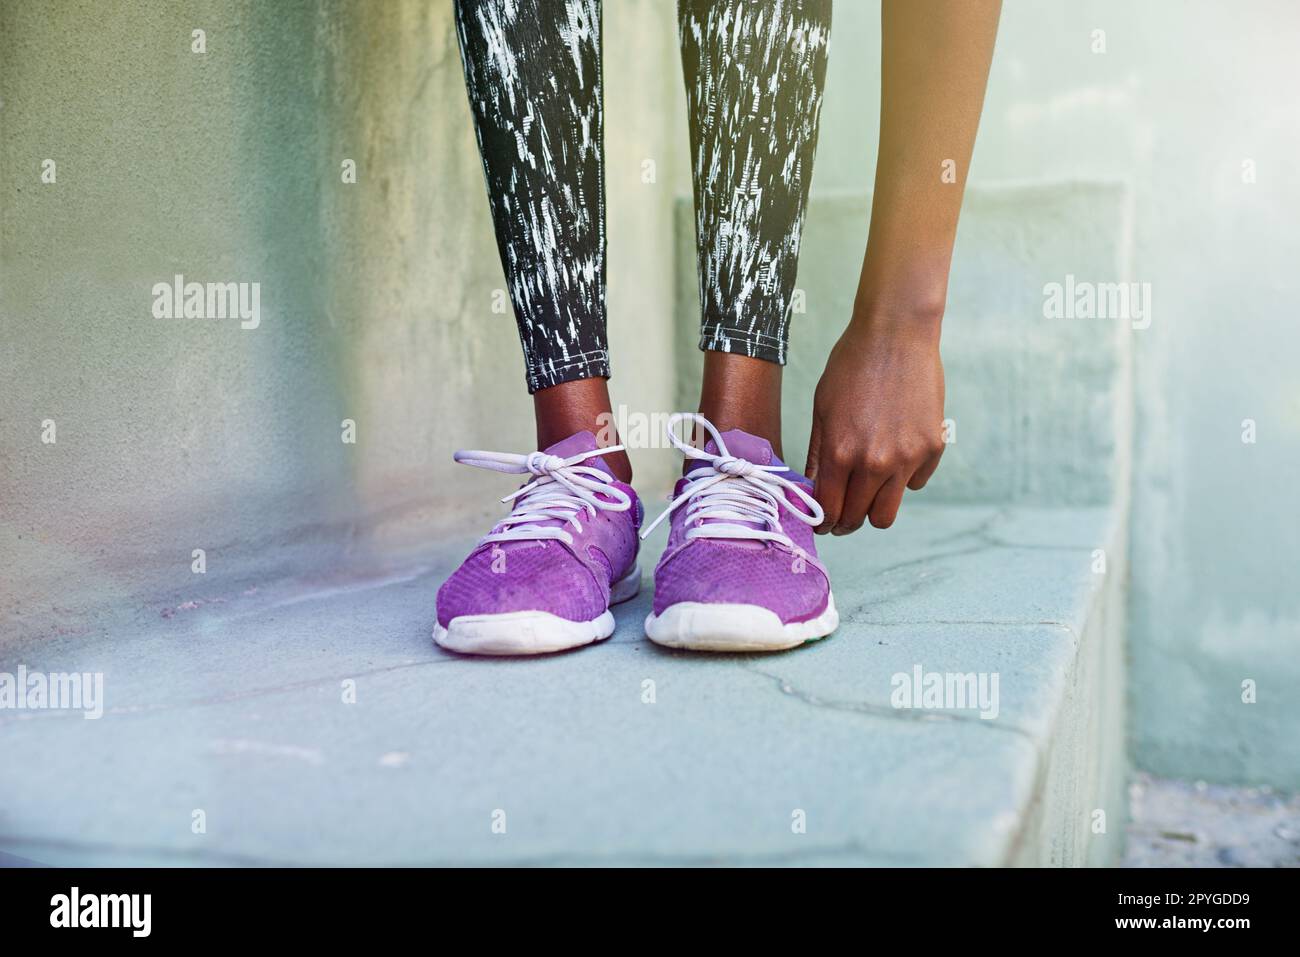 Shes got the right footwear. a female athletes footwear. Stock Photo